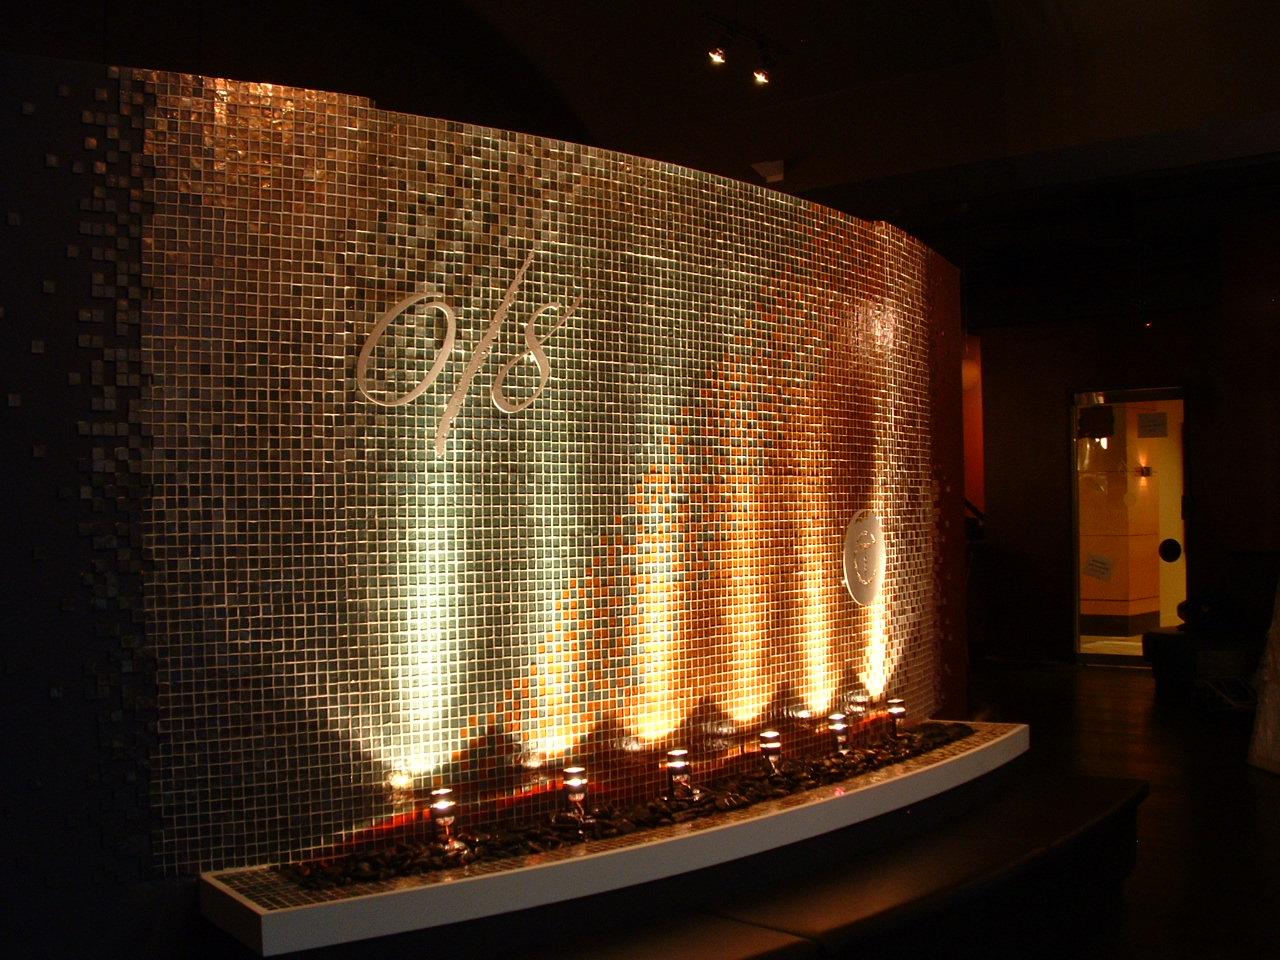 0/8 seafood grills and twisted cork wine bar located within the Bellevue WA Hyatt hotel for locally famous chef Dan Thiessen. 18 ft x 8 ft tall radius, ambiente 1 in x 1 in gradient mosaic tiles grouted into place. Pewter finished 0/8 and twisted cork stainless steel logos displayed out in front the water, infinity style hidden delivery system to add mystery, basin topped with black beach rock, up lit for a dramatic effect auto filler easy drain new construction.